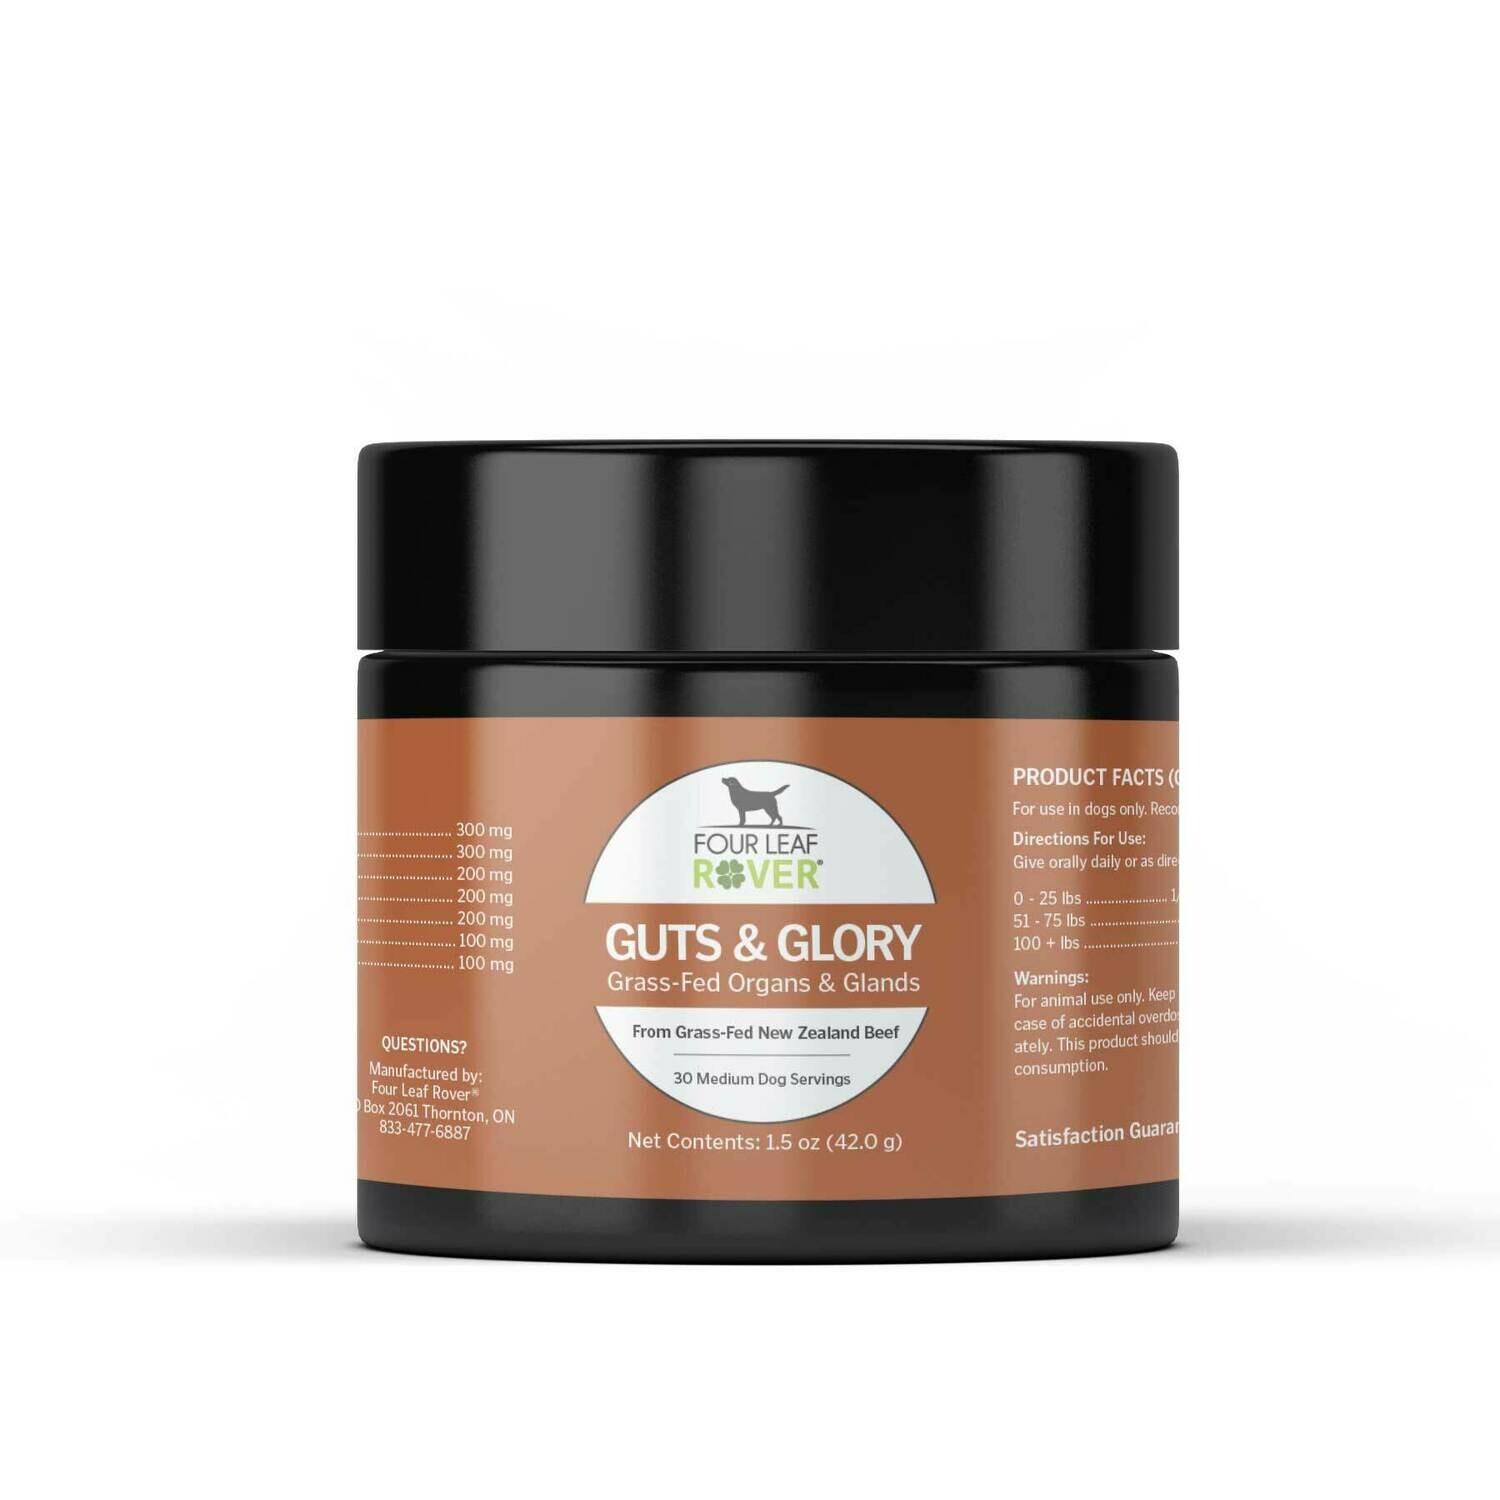 GUTS AND GLORY - Grass Fed Organs for Dogs